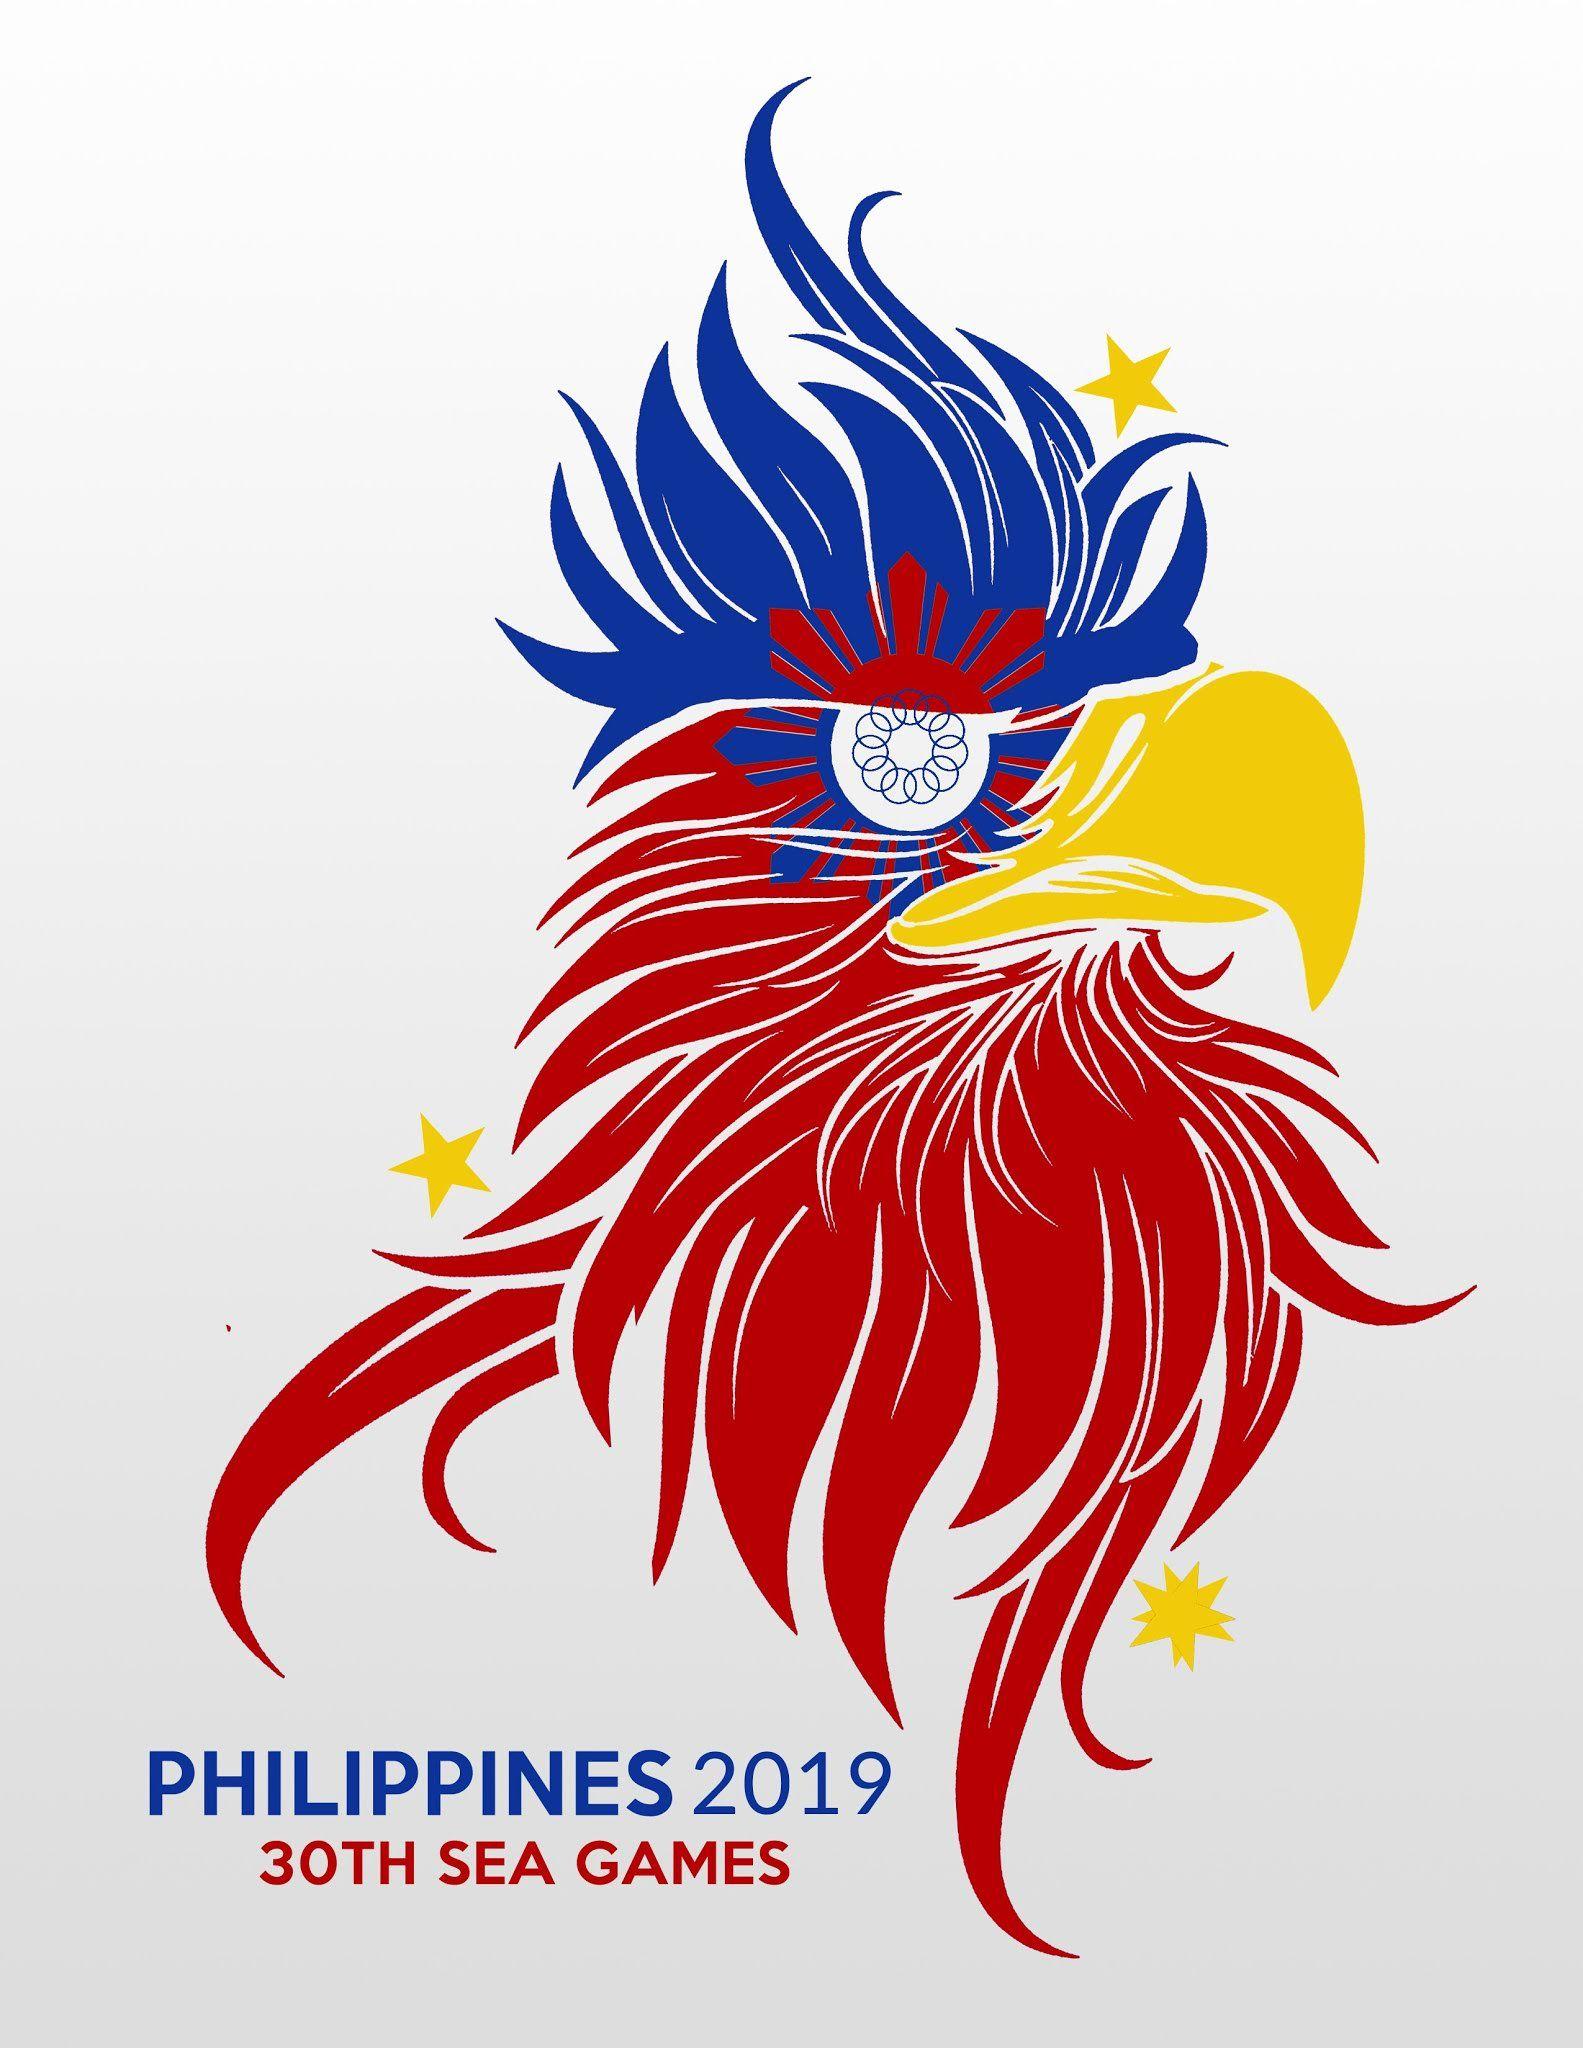 Philippines Logo - Philippine eagle shines as netizens redesign 2019 SEA Games logo